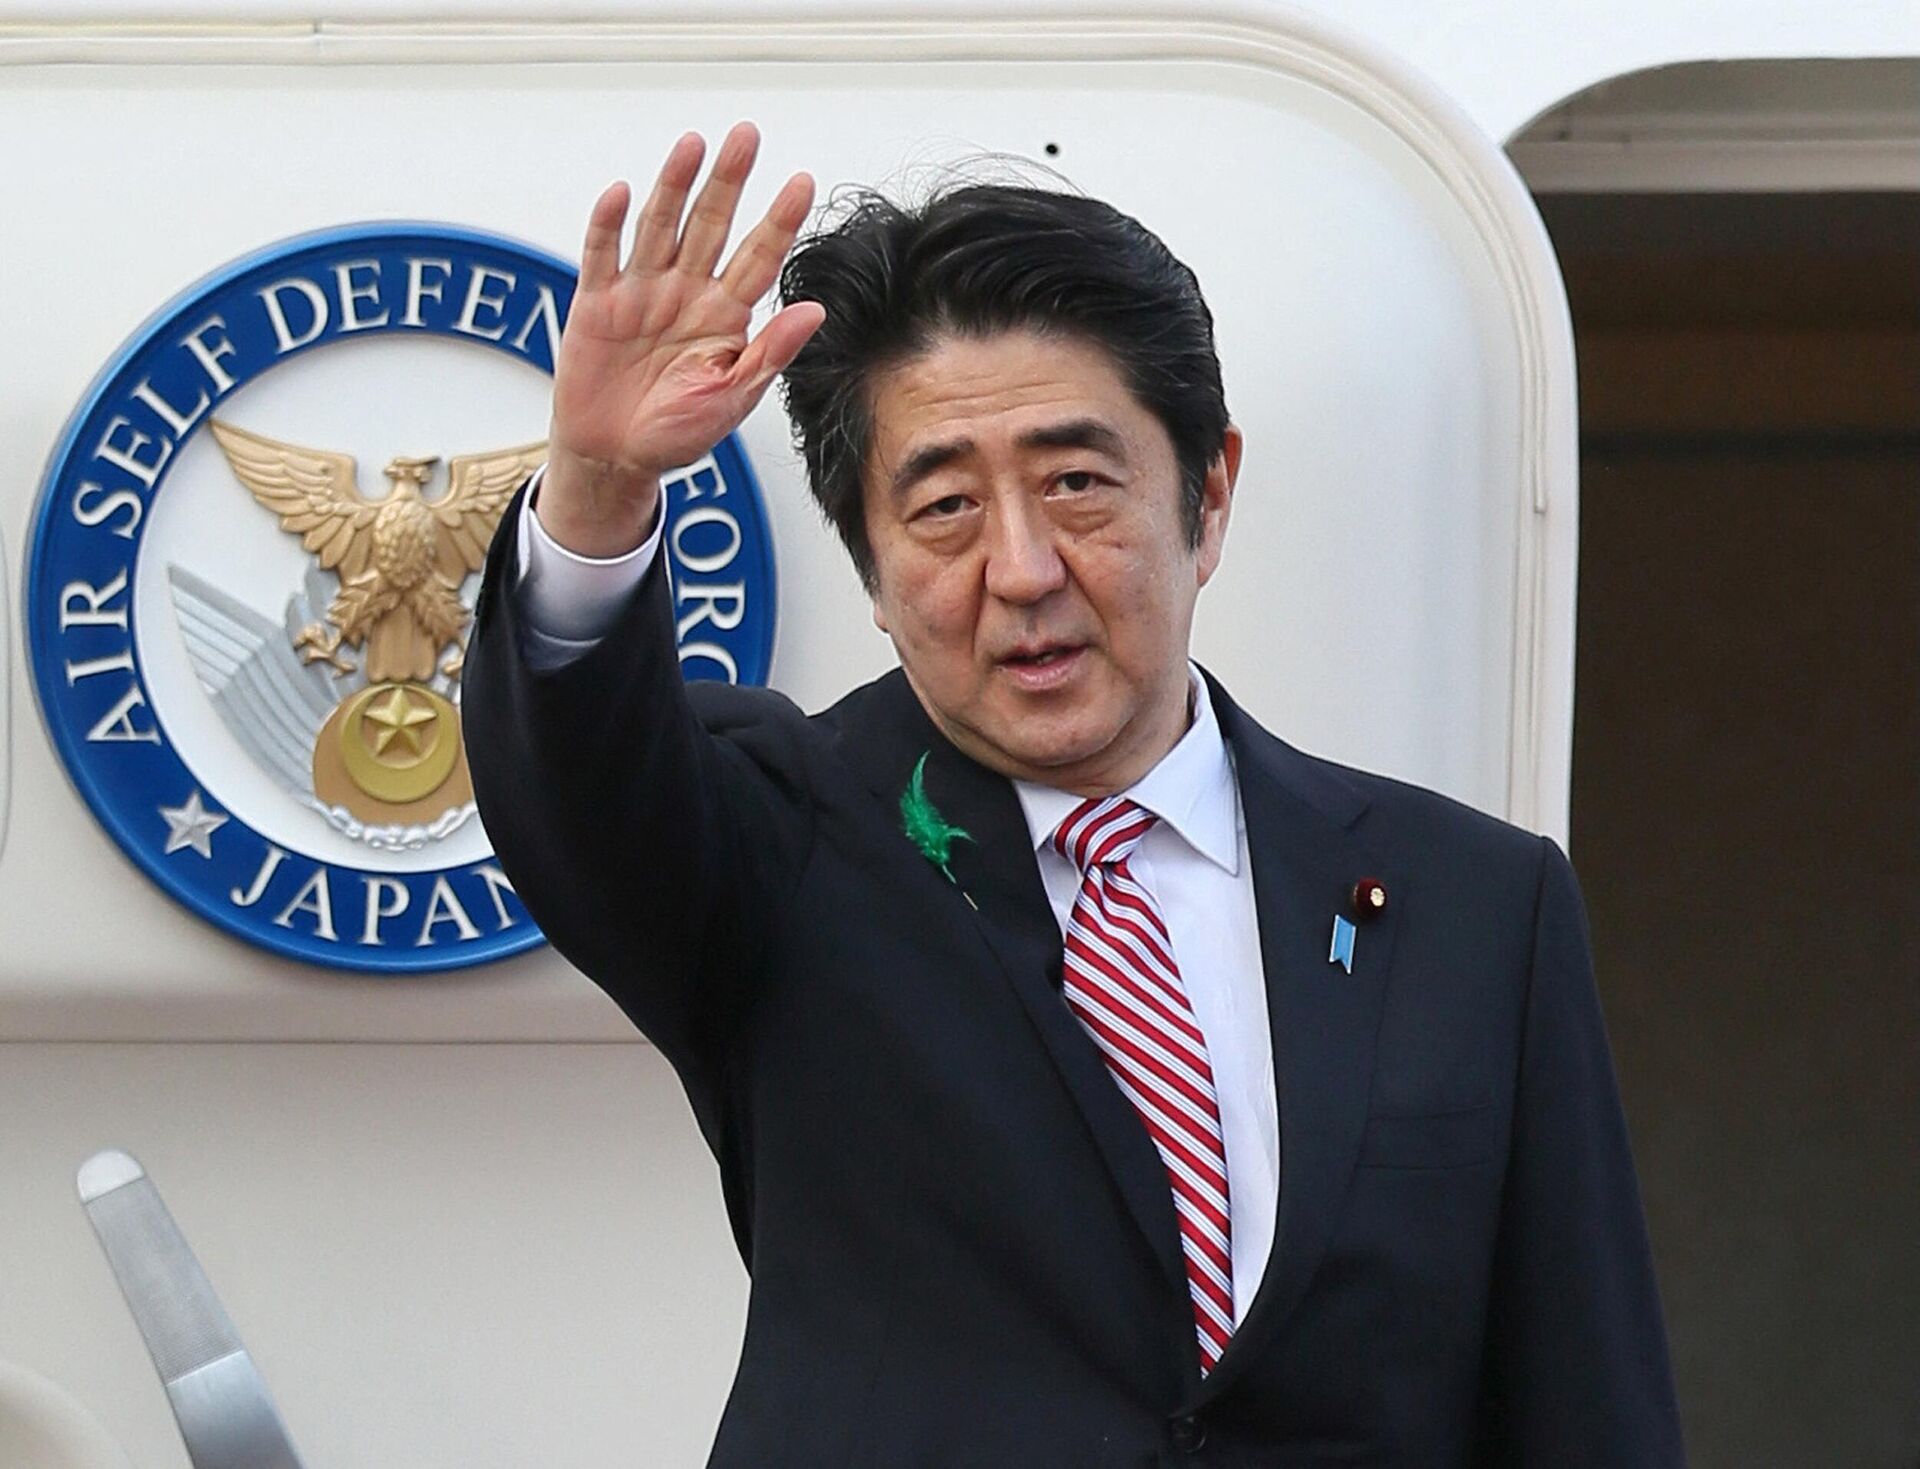  In this file photo taken on April 21, 2015 Japanese Prime Minister Shinzo Abe waves as he leaves to Indonesia at the Tokyo International Airport in Tokyo. - Sputnik International, 1920, 17.07.2022